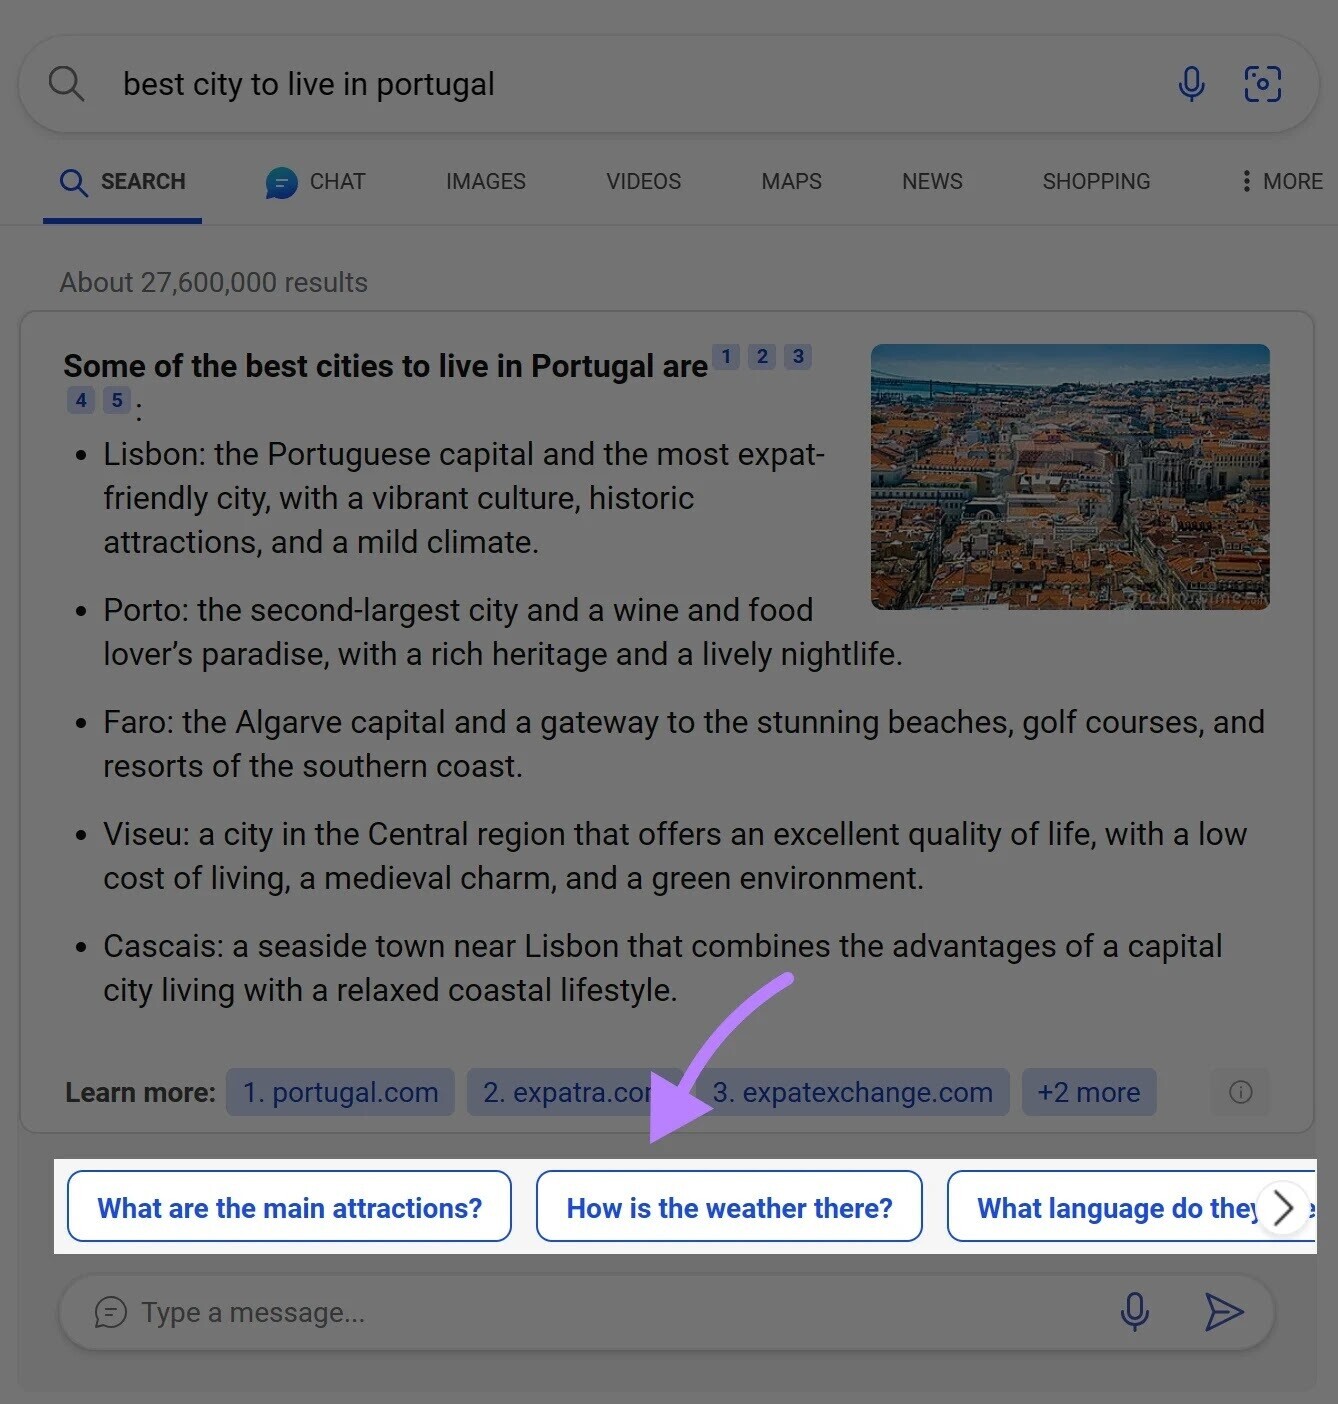 an example of follow-up questions below the main information when using Microsoft Edge